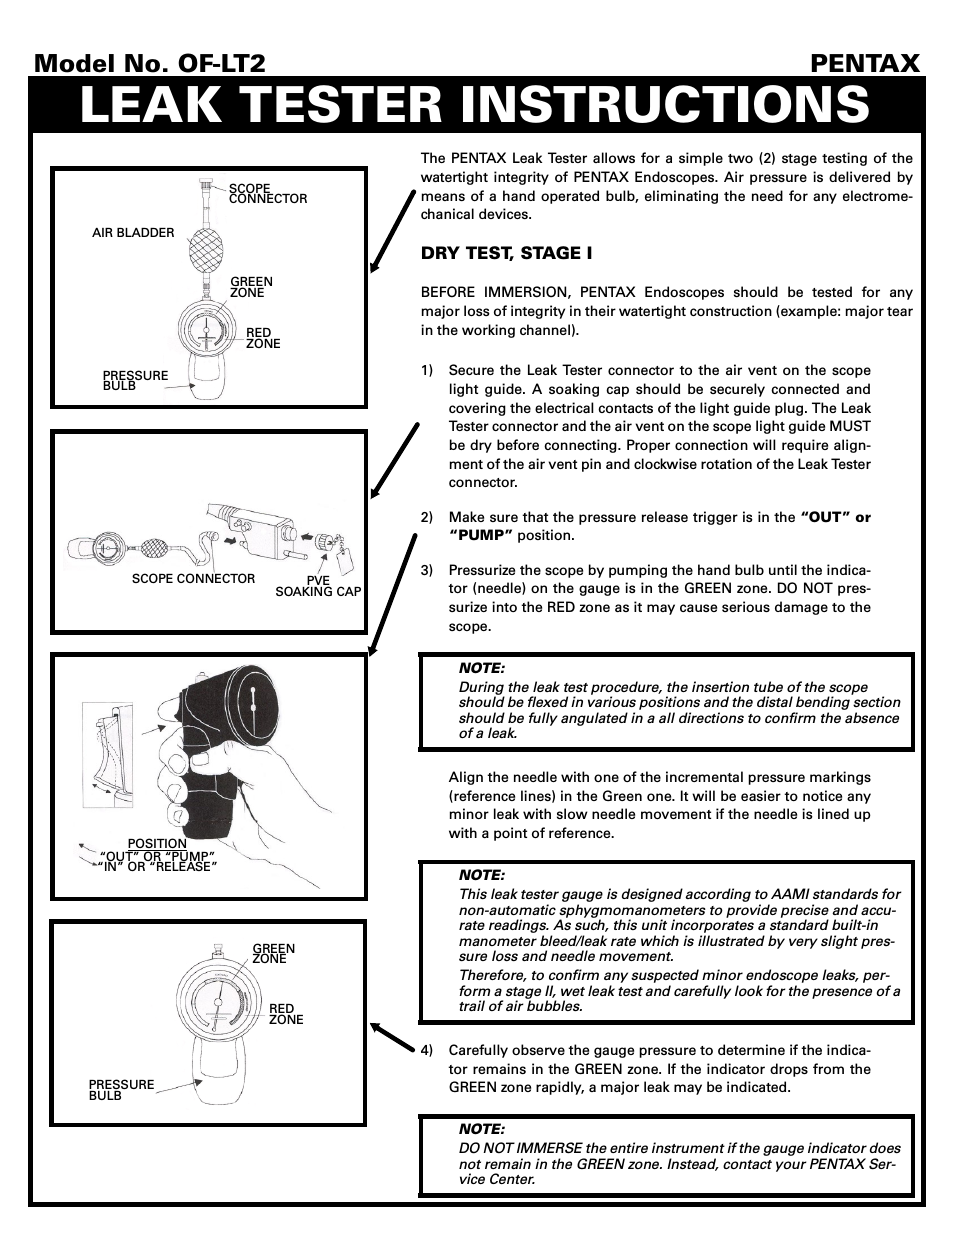 Pentax Leak Tester Instructions - Quick Reference Guide